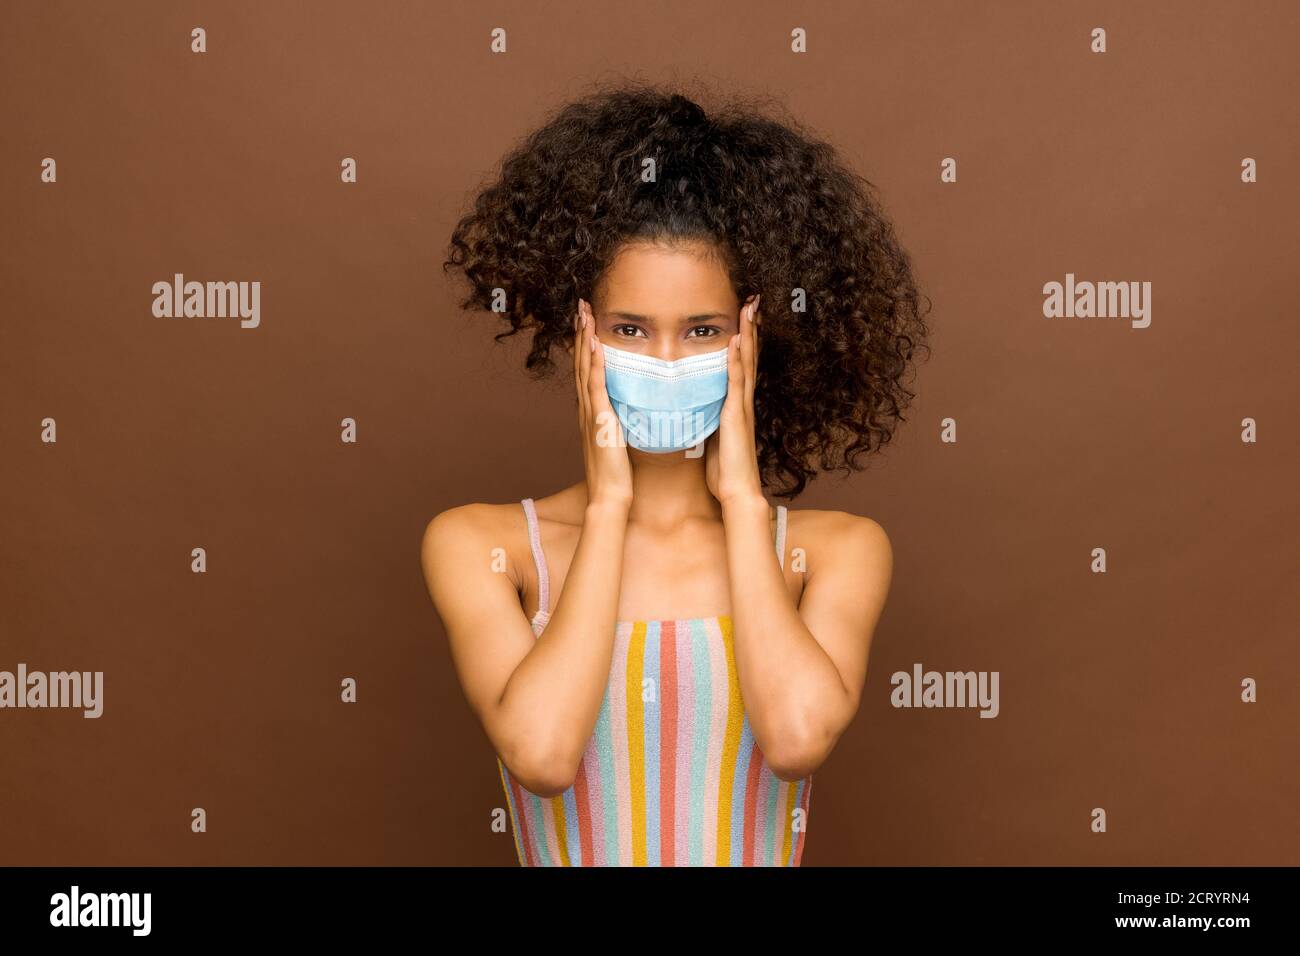 Attractive Dominican girl with thick curly long hair wearing a protective face mask for infection control during the Covid-19 pandemic over a brown st Stock Photo